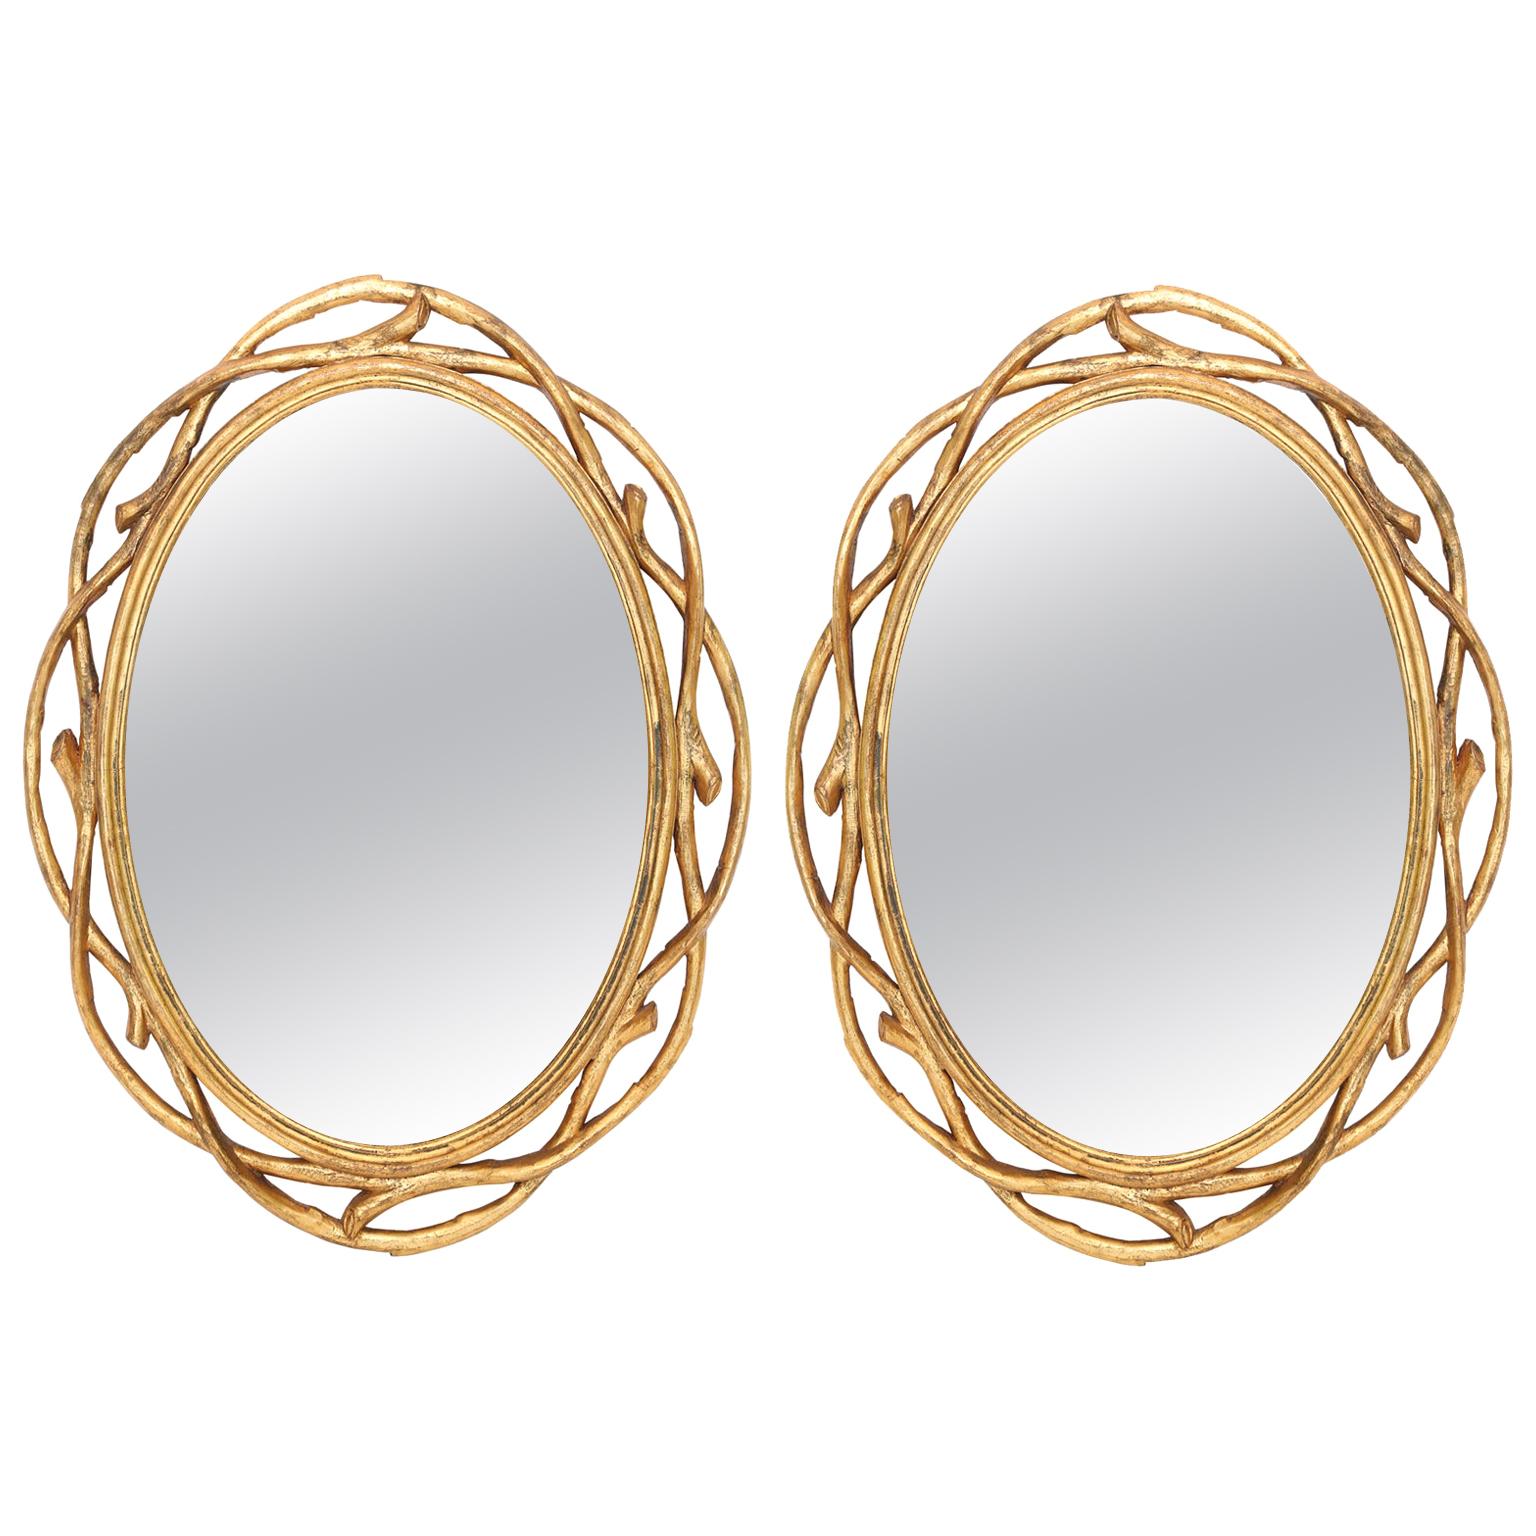 Pair of Gilded Arboreal Mirrors